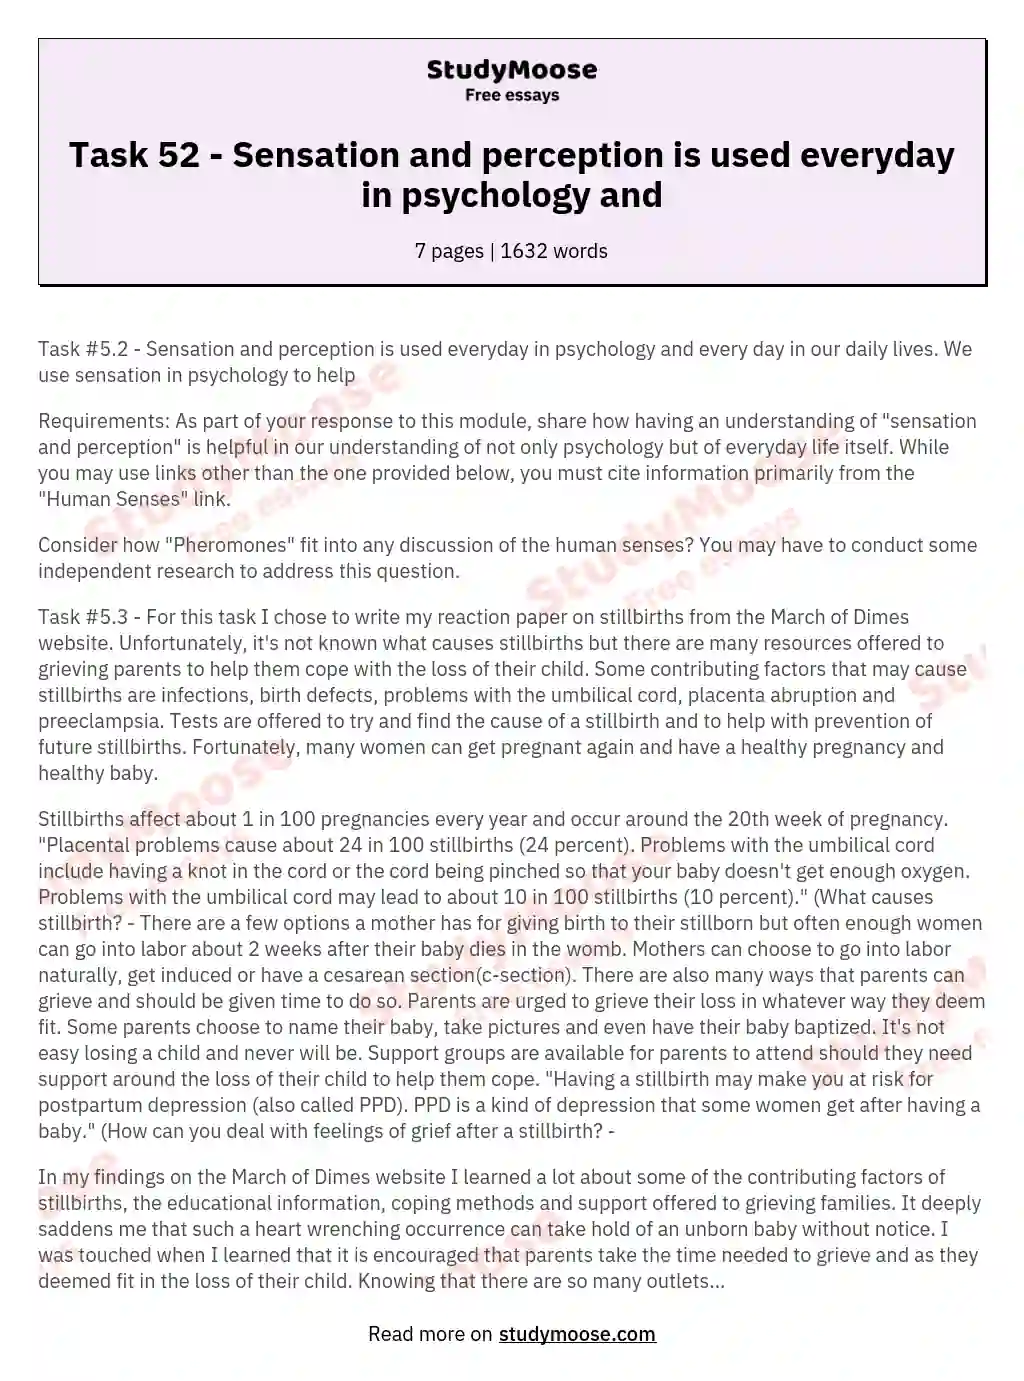 how is psychology used in everyday life essay